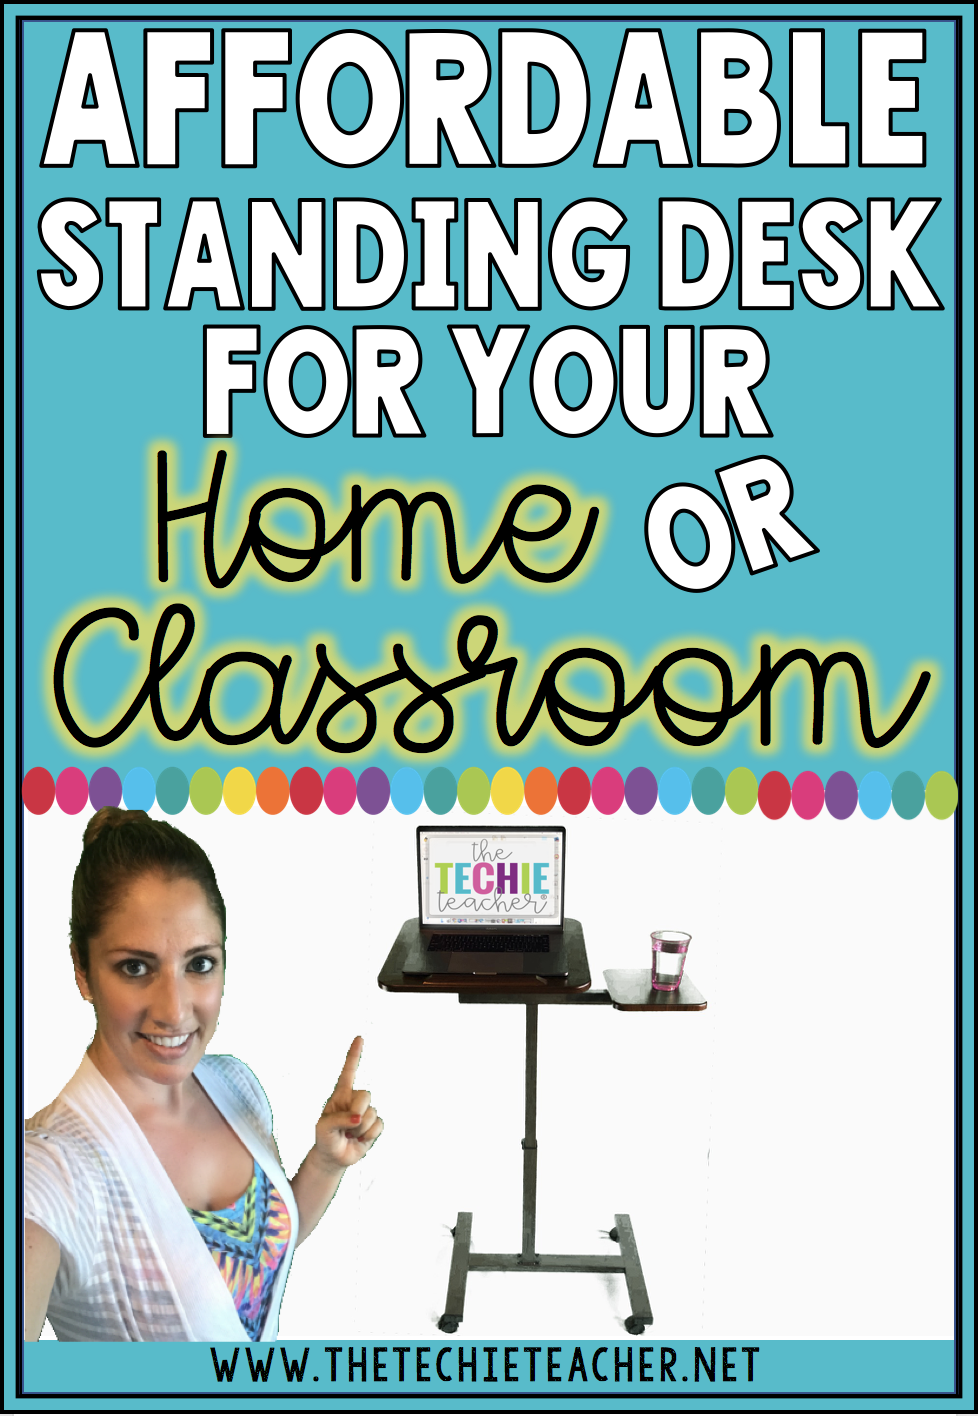 Affordable standing desk for your home or classroom